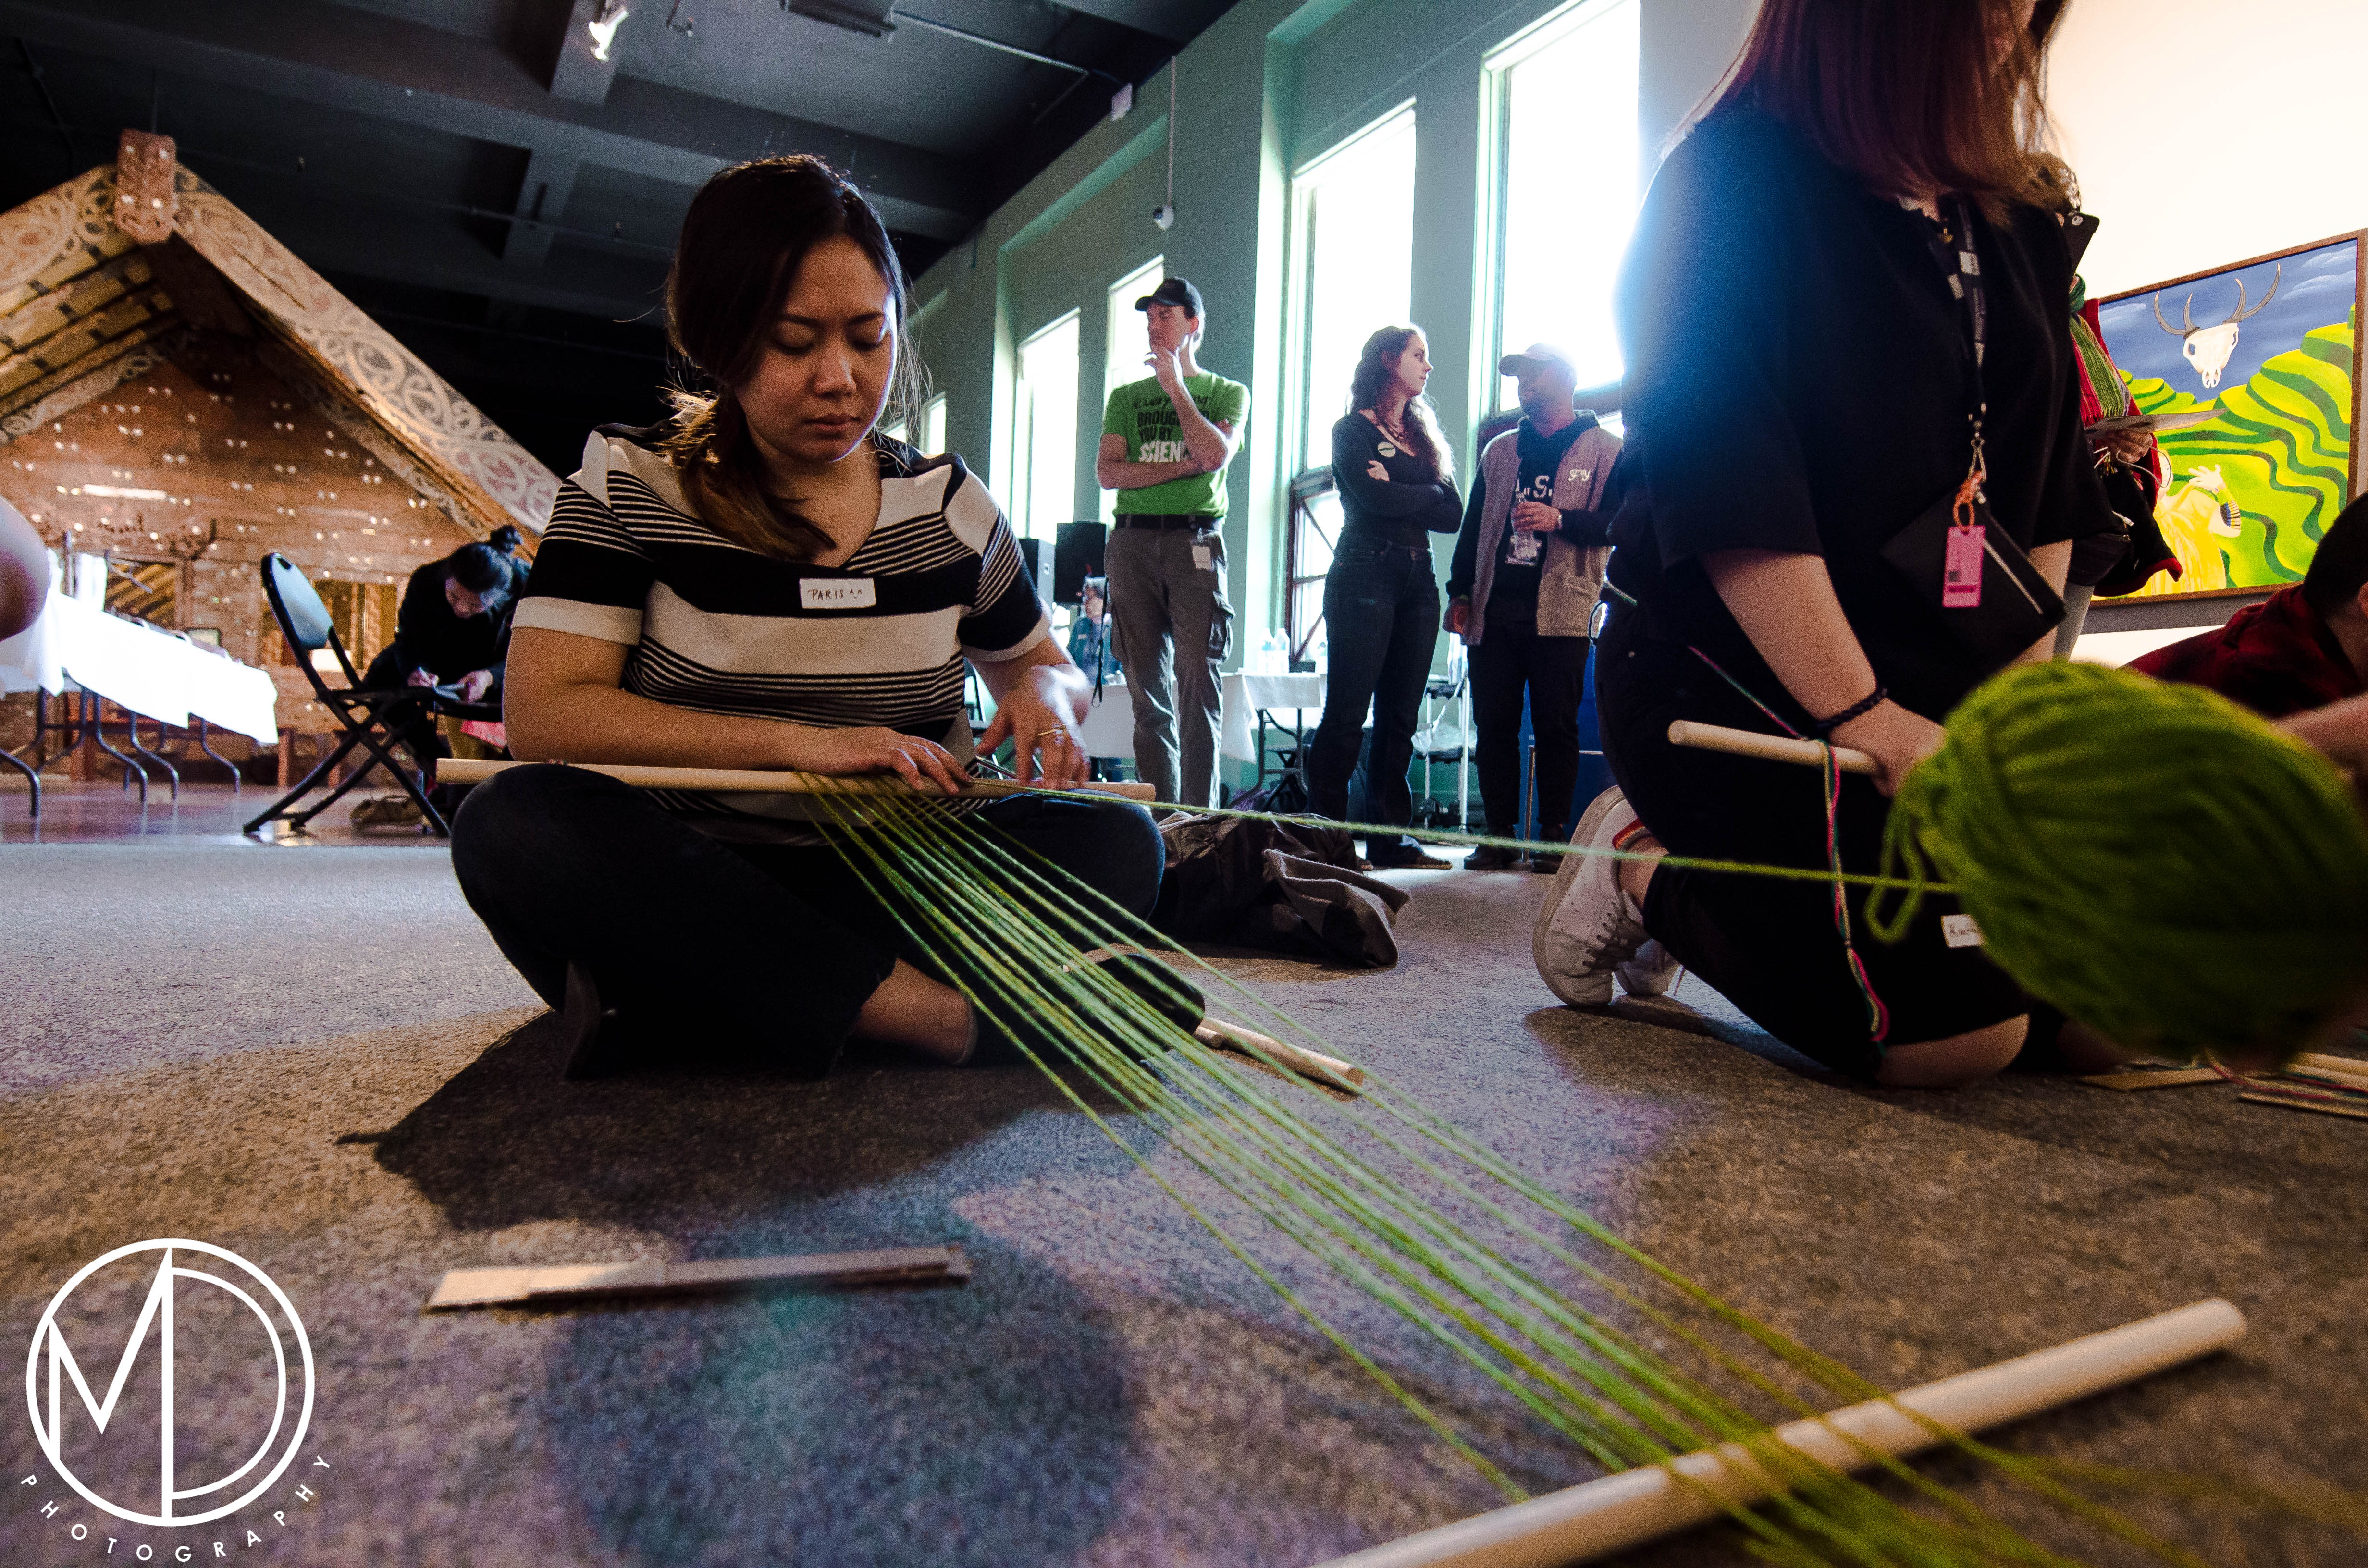 Guest participating in the weaving activity. 